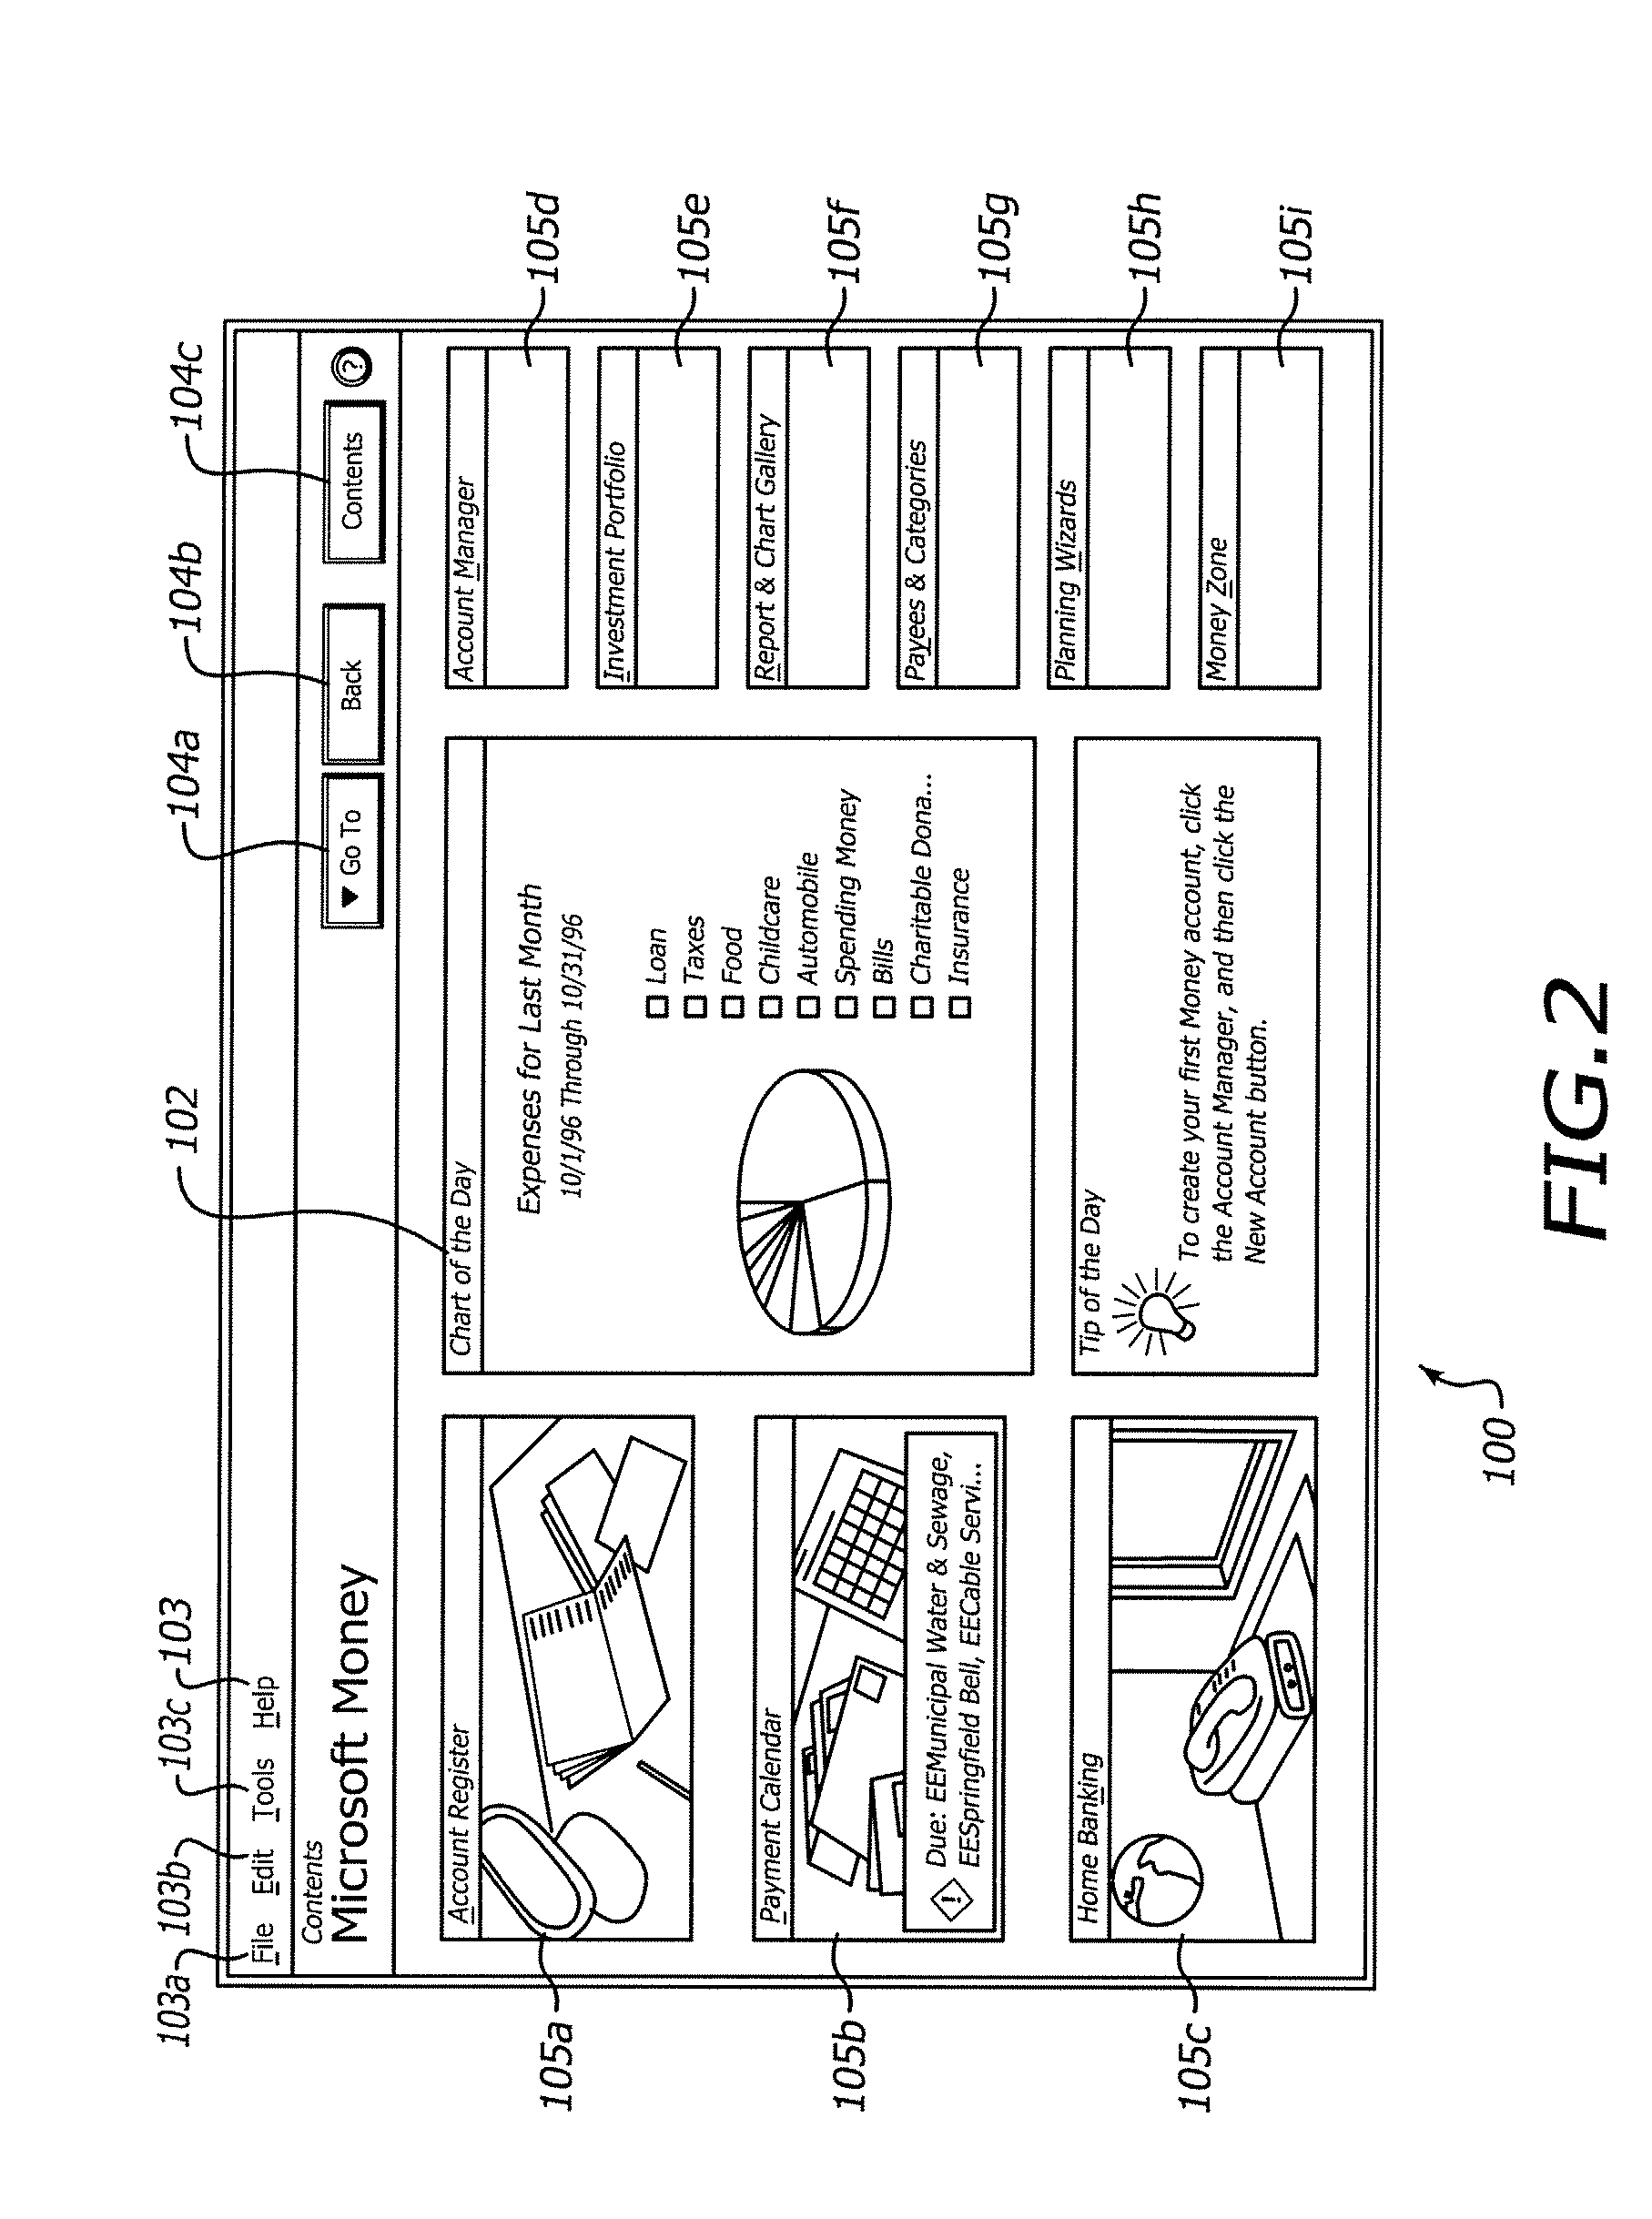 Method and system for correcting payee names and adjusting an account balance for a financial statement